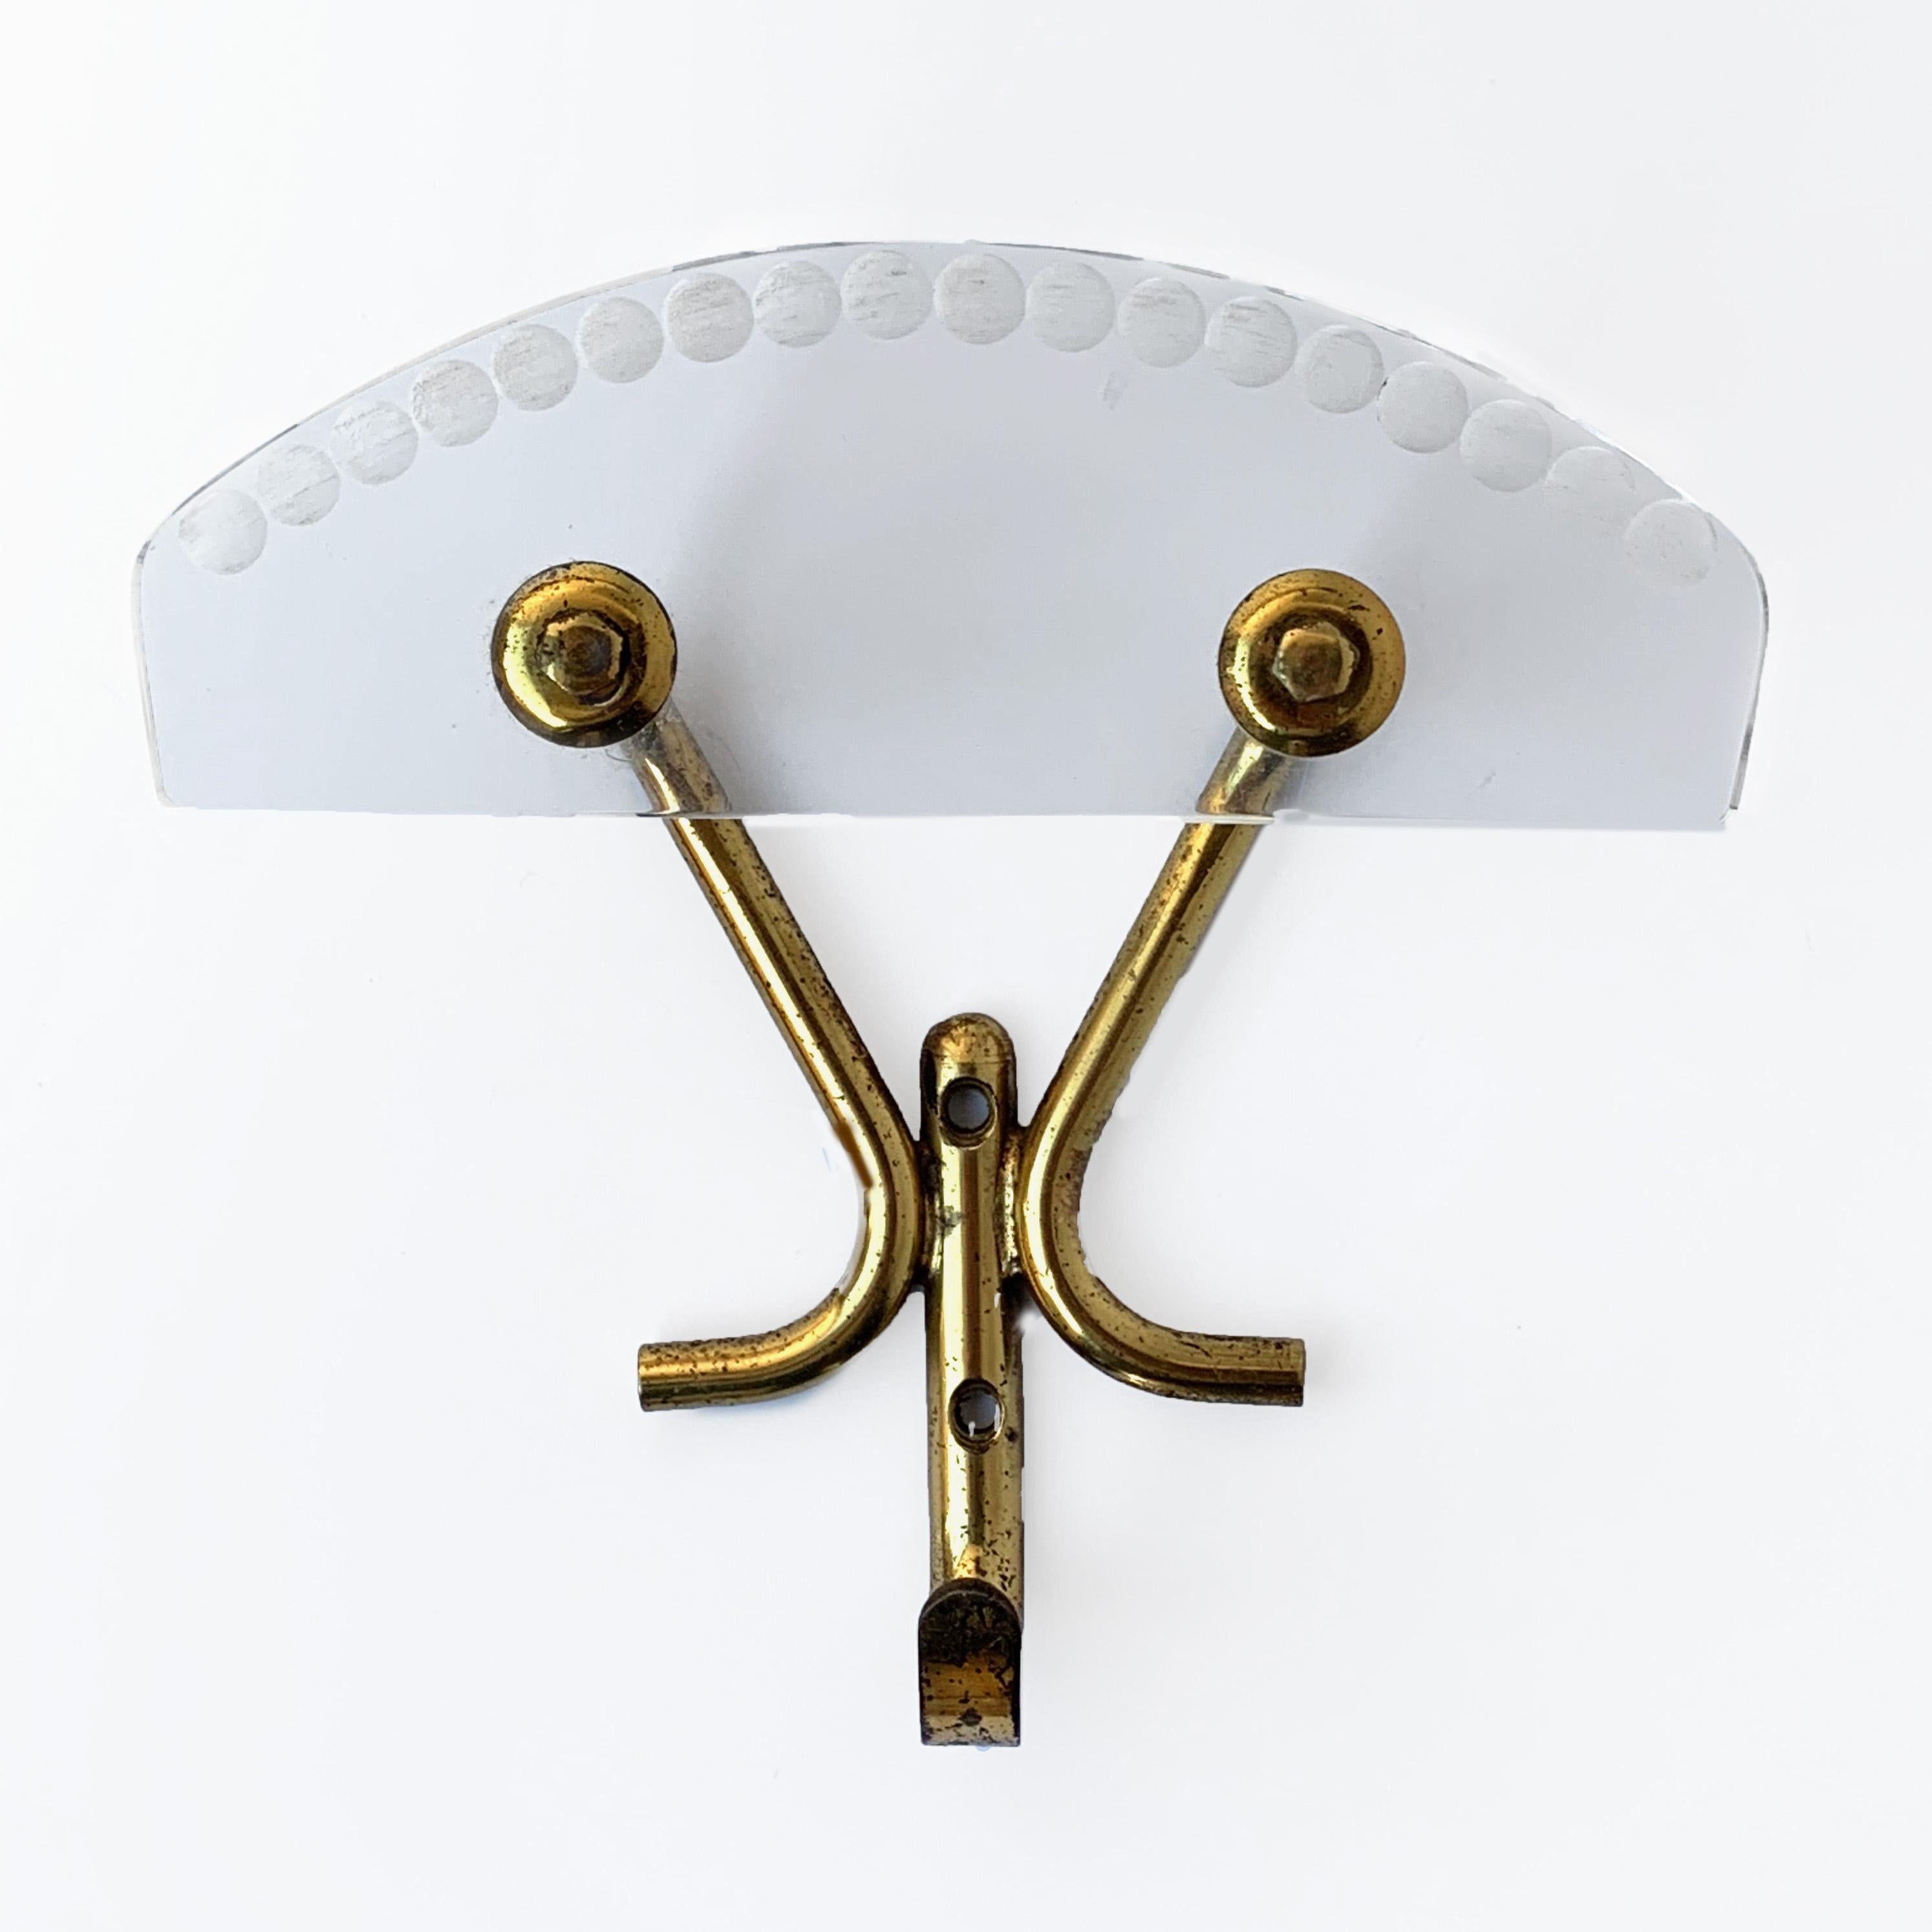 Set of four hangers made of Lucite and brass, Italy 1950s. Coat Hangers

Dimensions: Width 13 cm, depth 6 cm, height 14 cm.